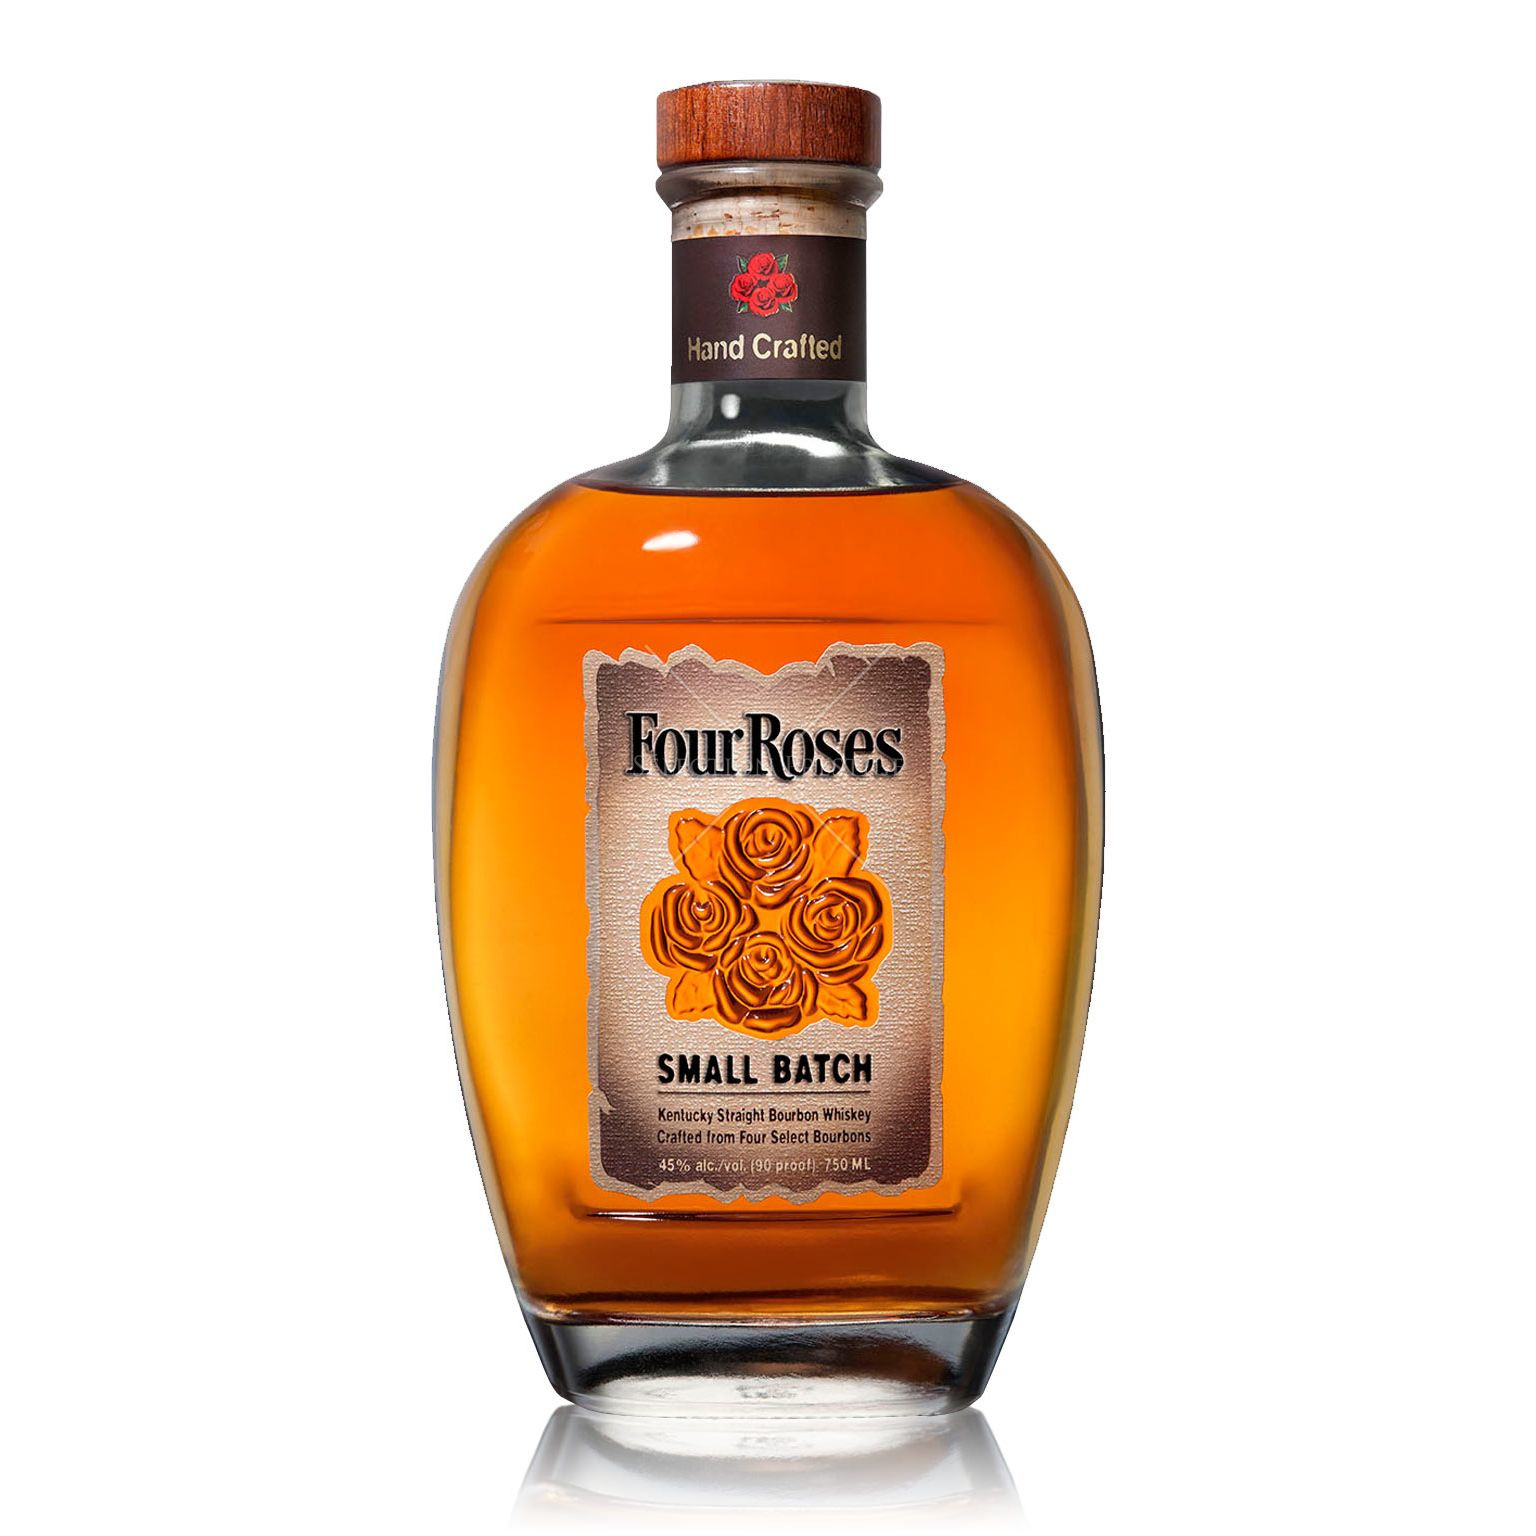 Four Roses Small Batch 0,7l